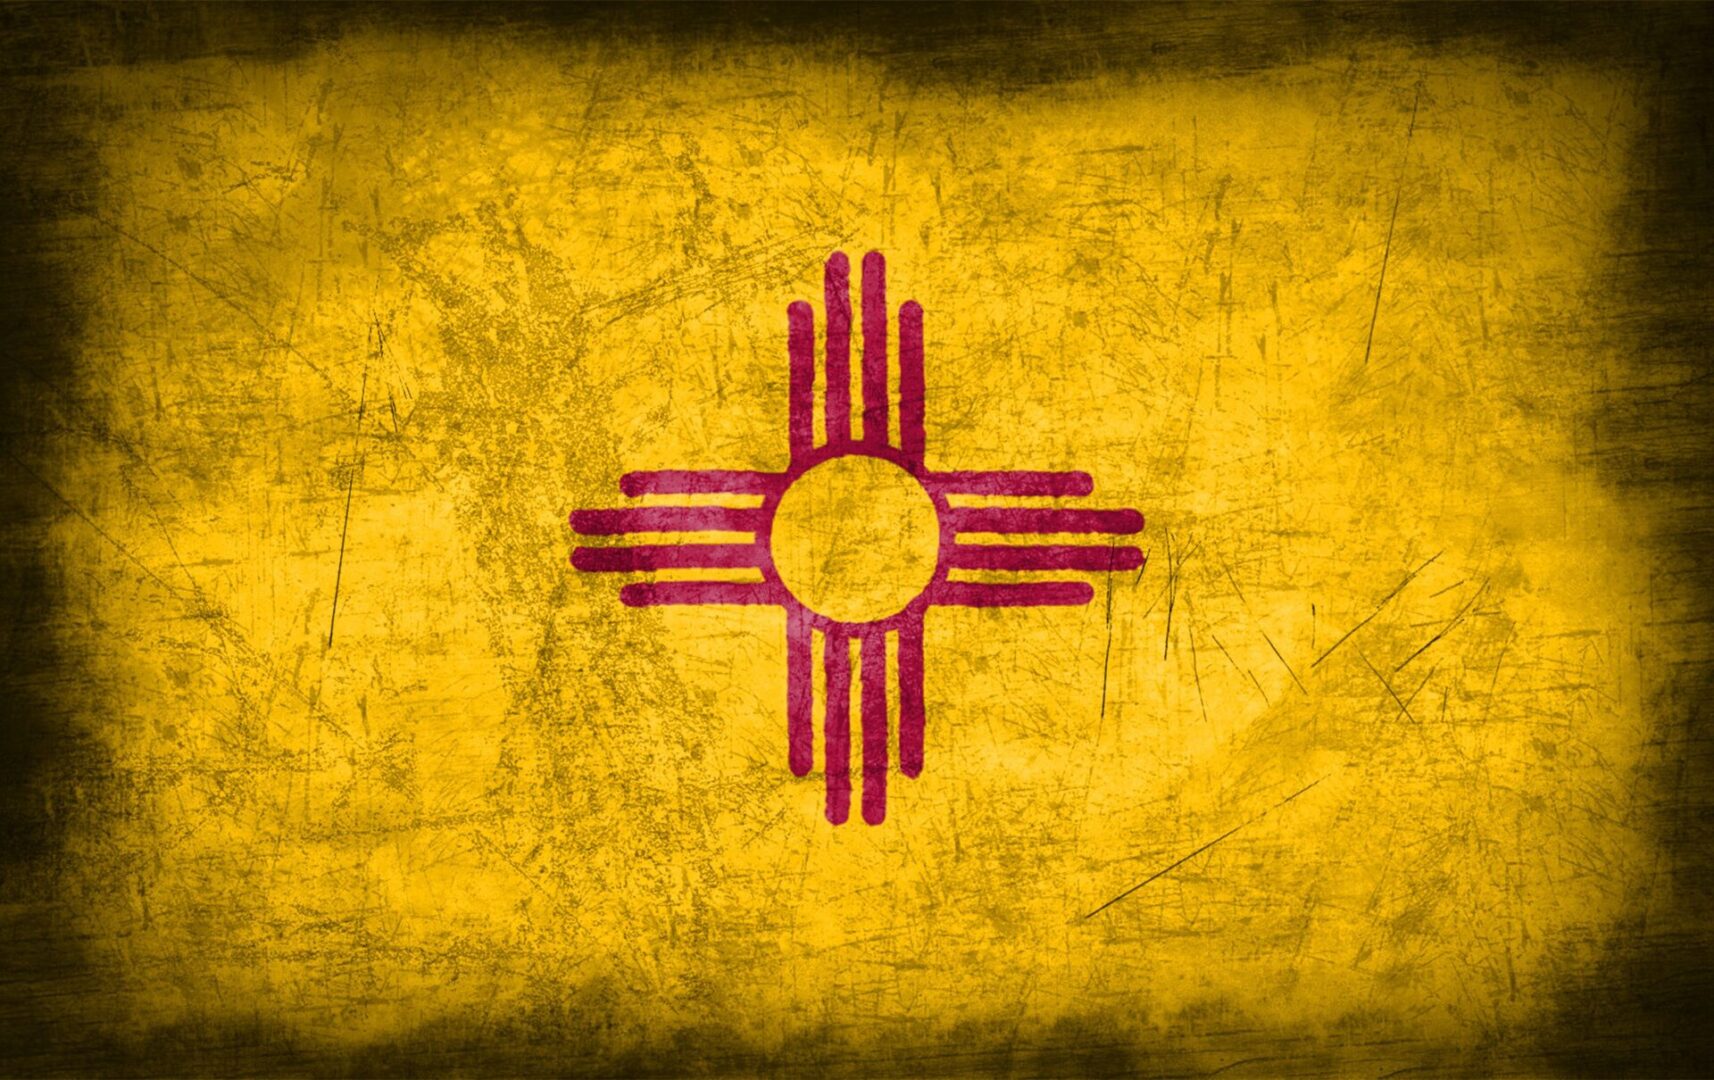 A flag of new mexico painted on a wall.